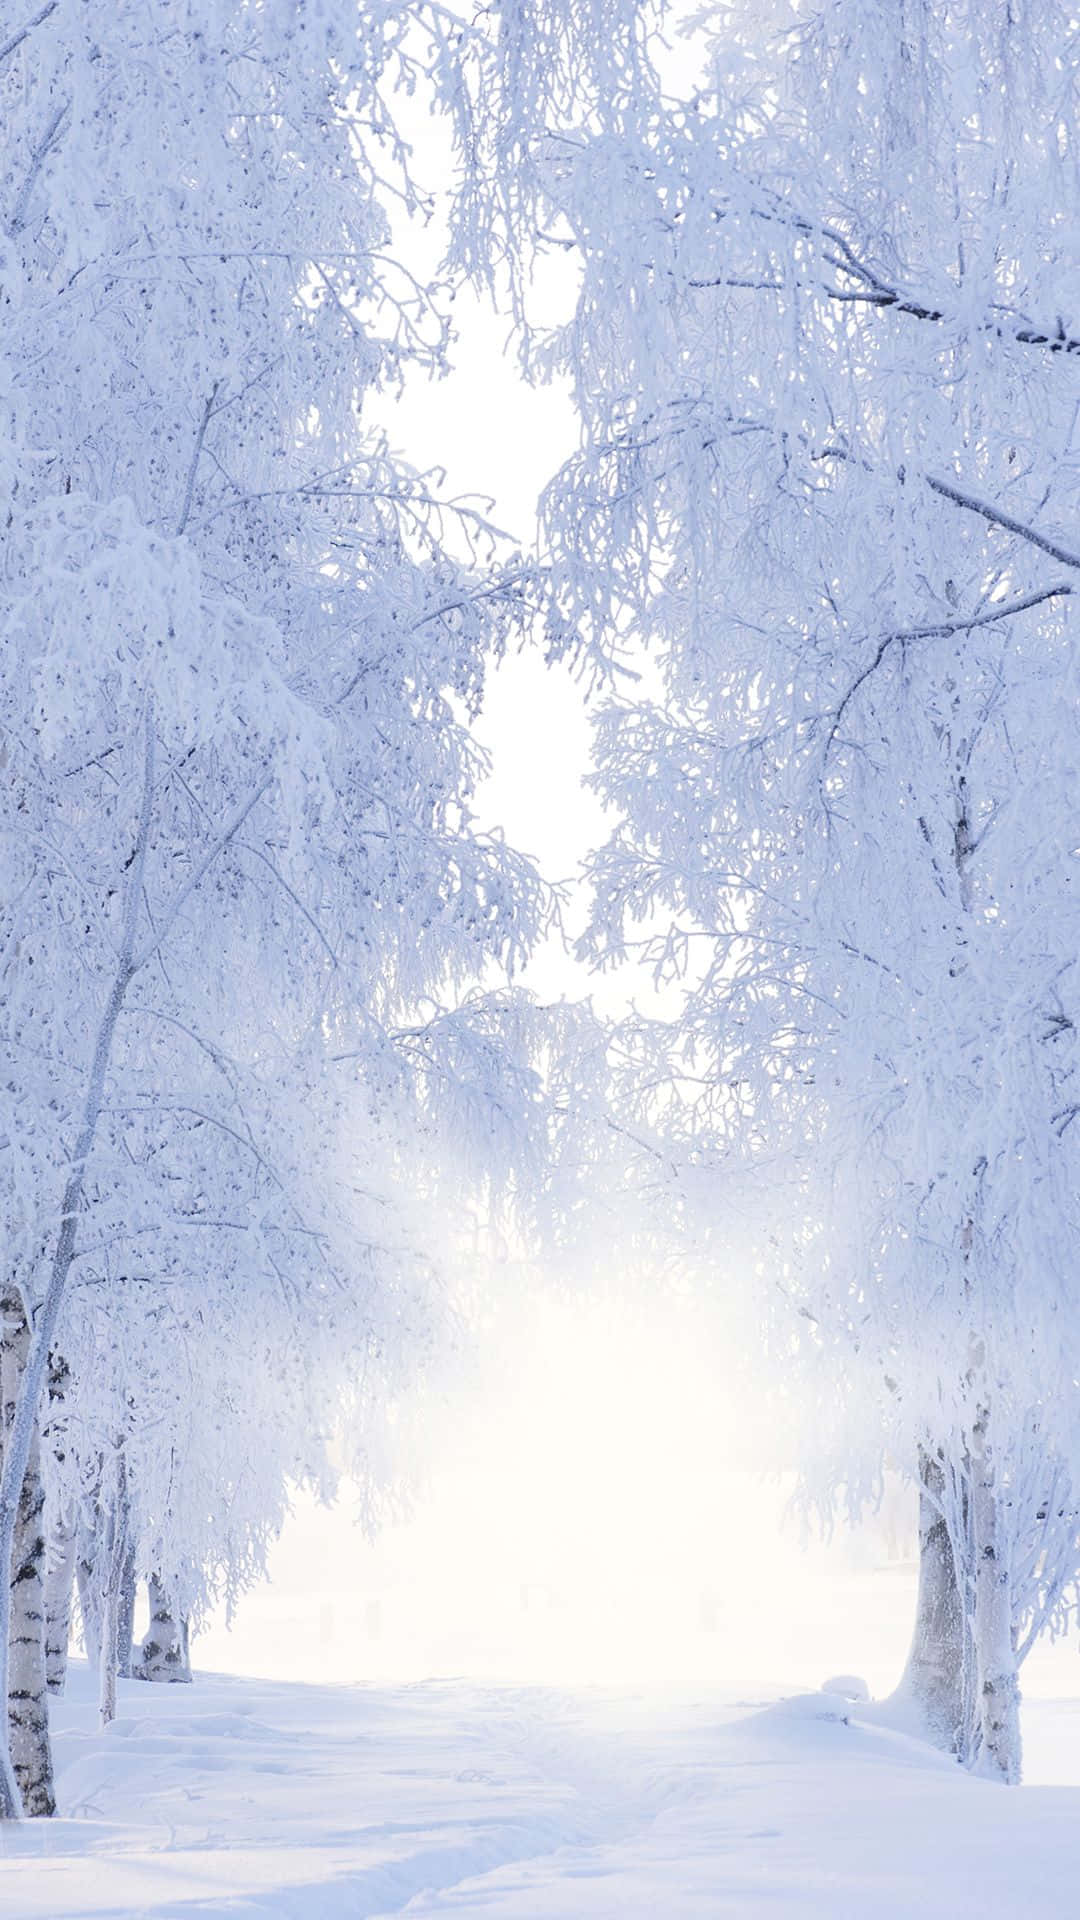 Captivating Winter Scenery on iPhone 6 Plus Wallpaper